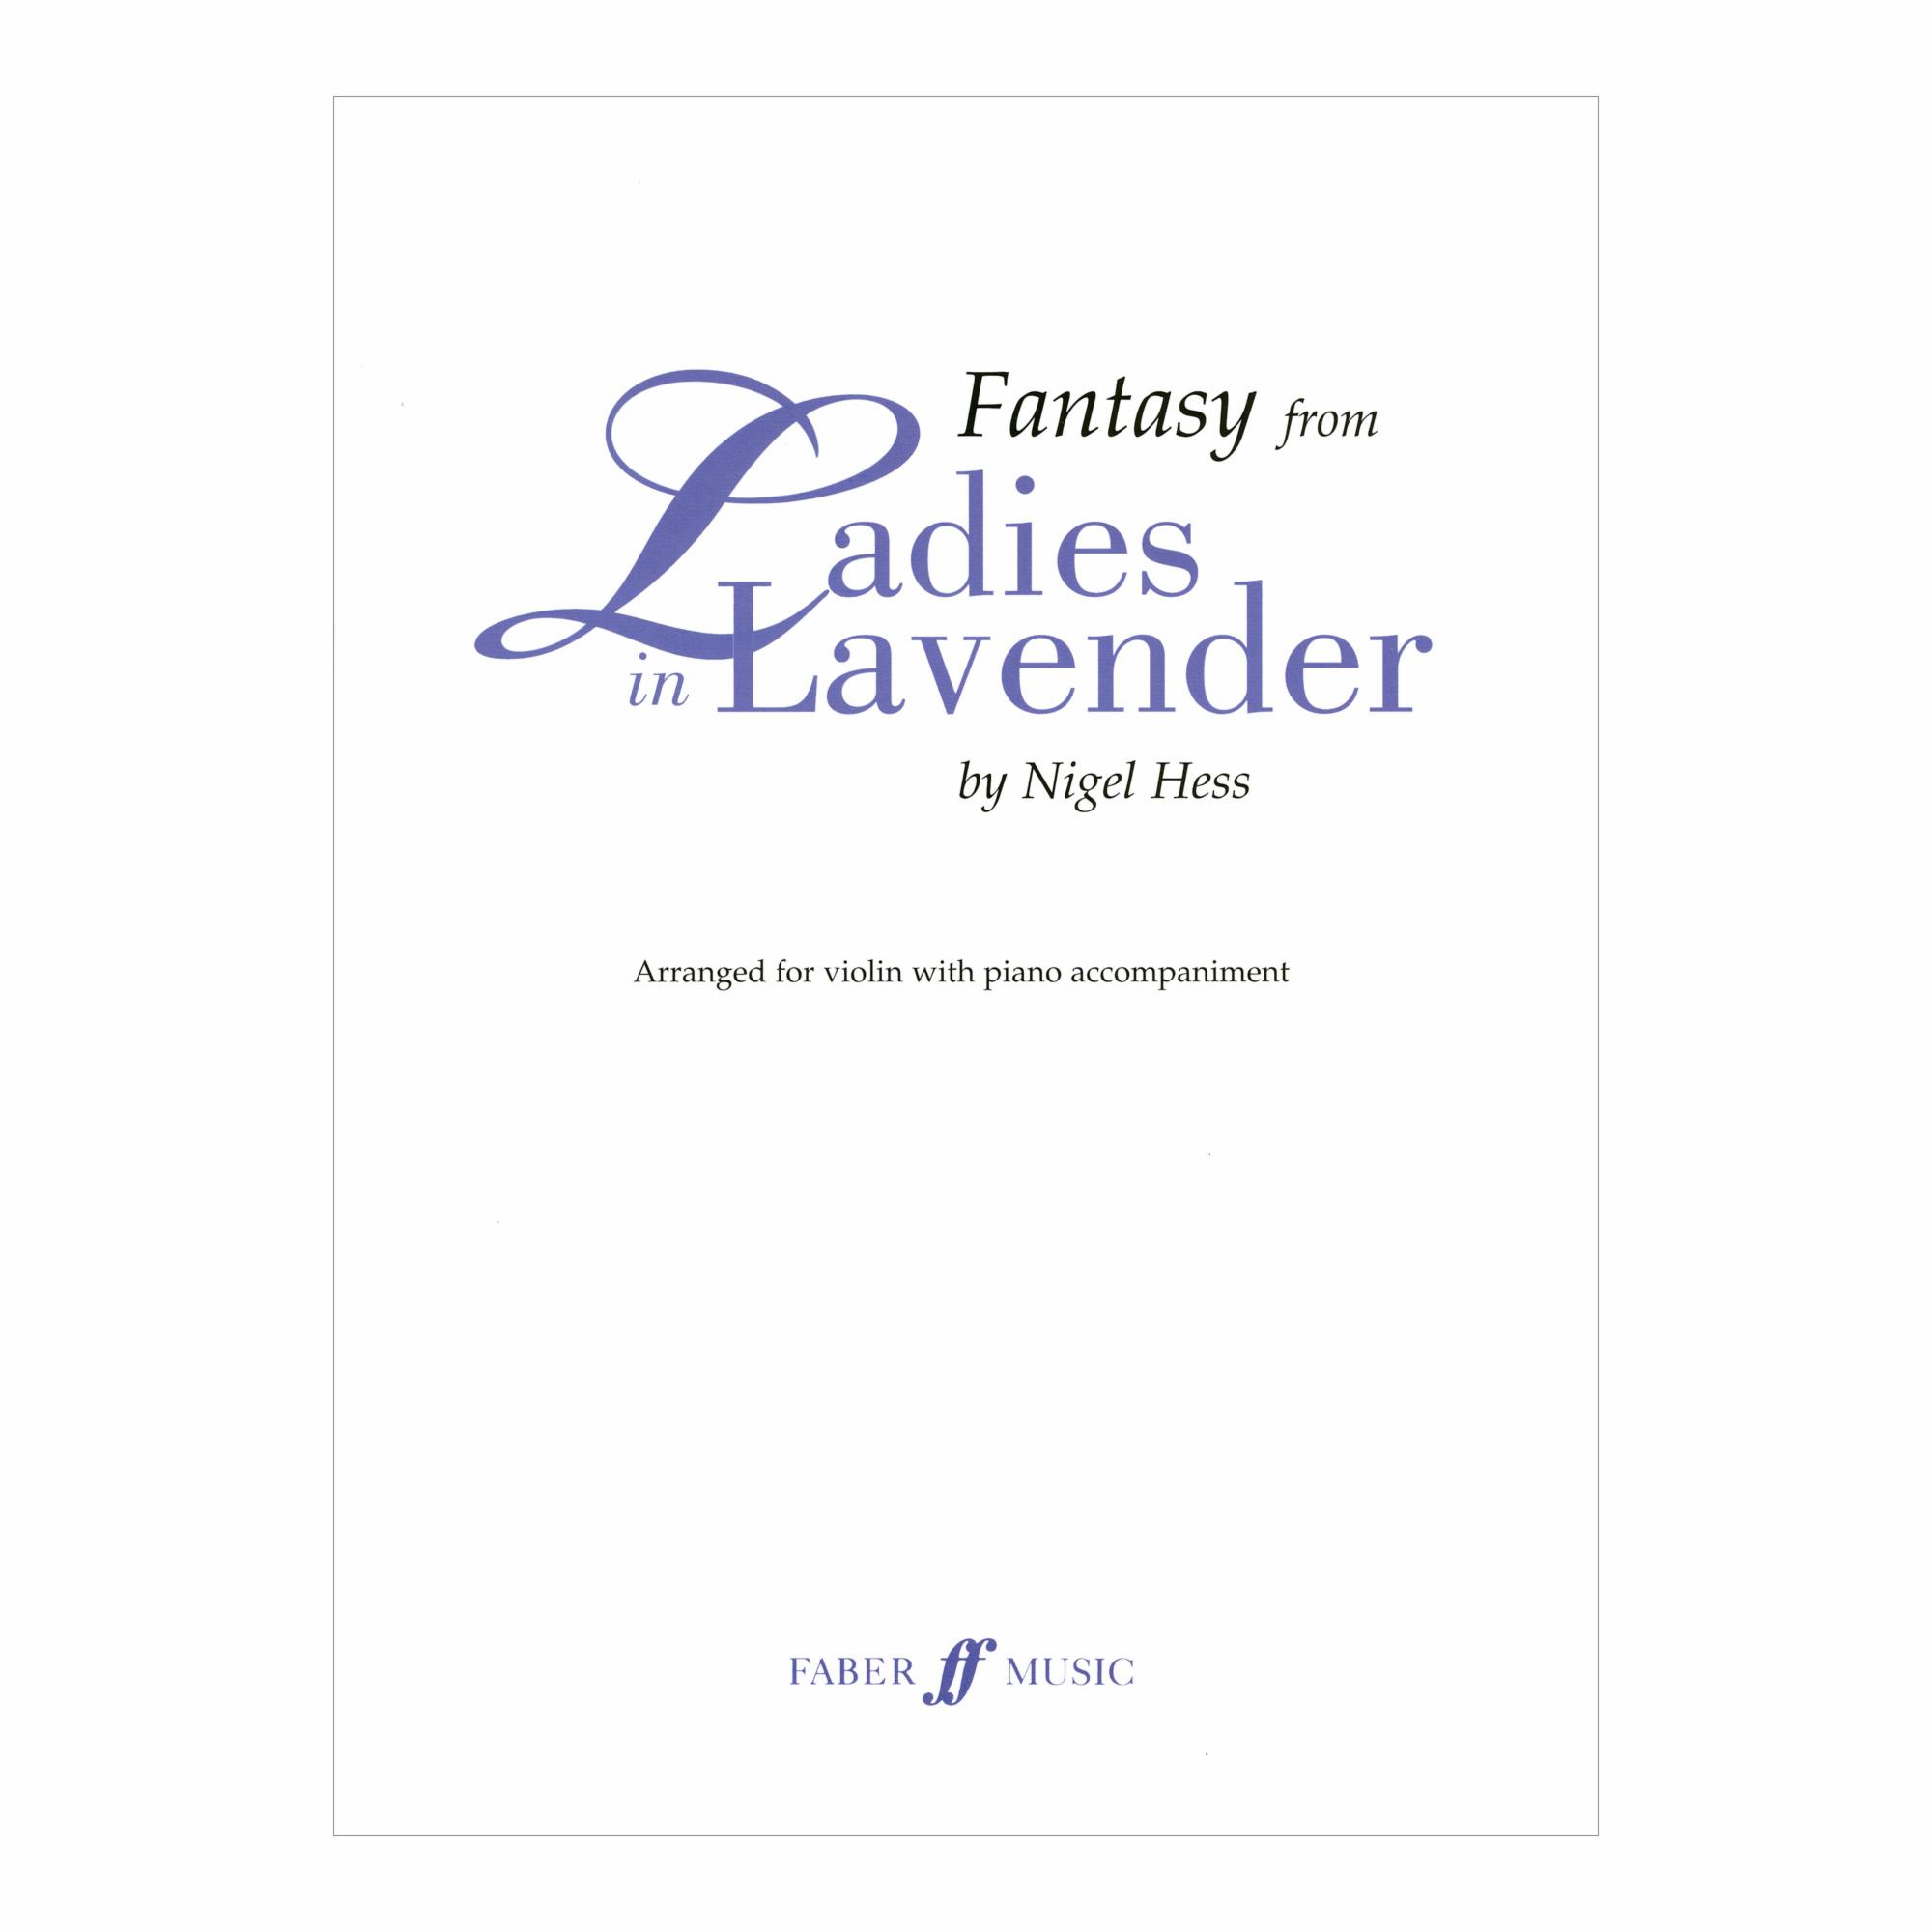 Fantasy from Ladies in Lavender